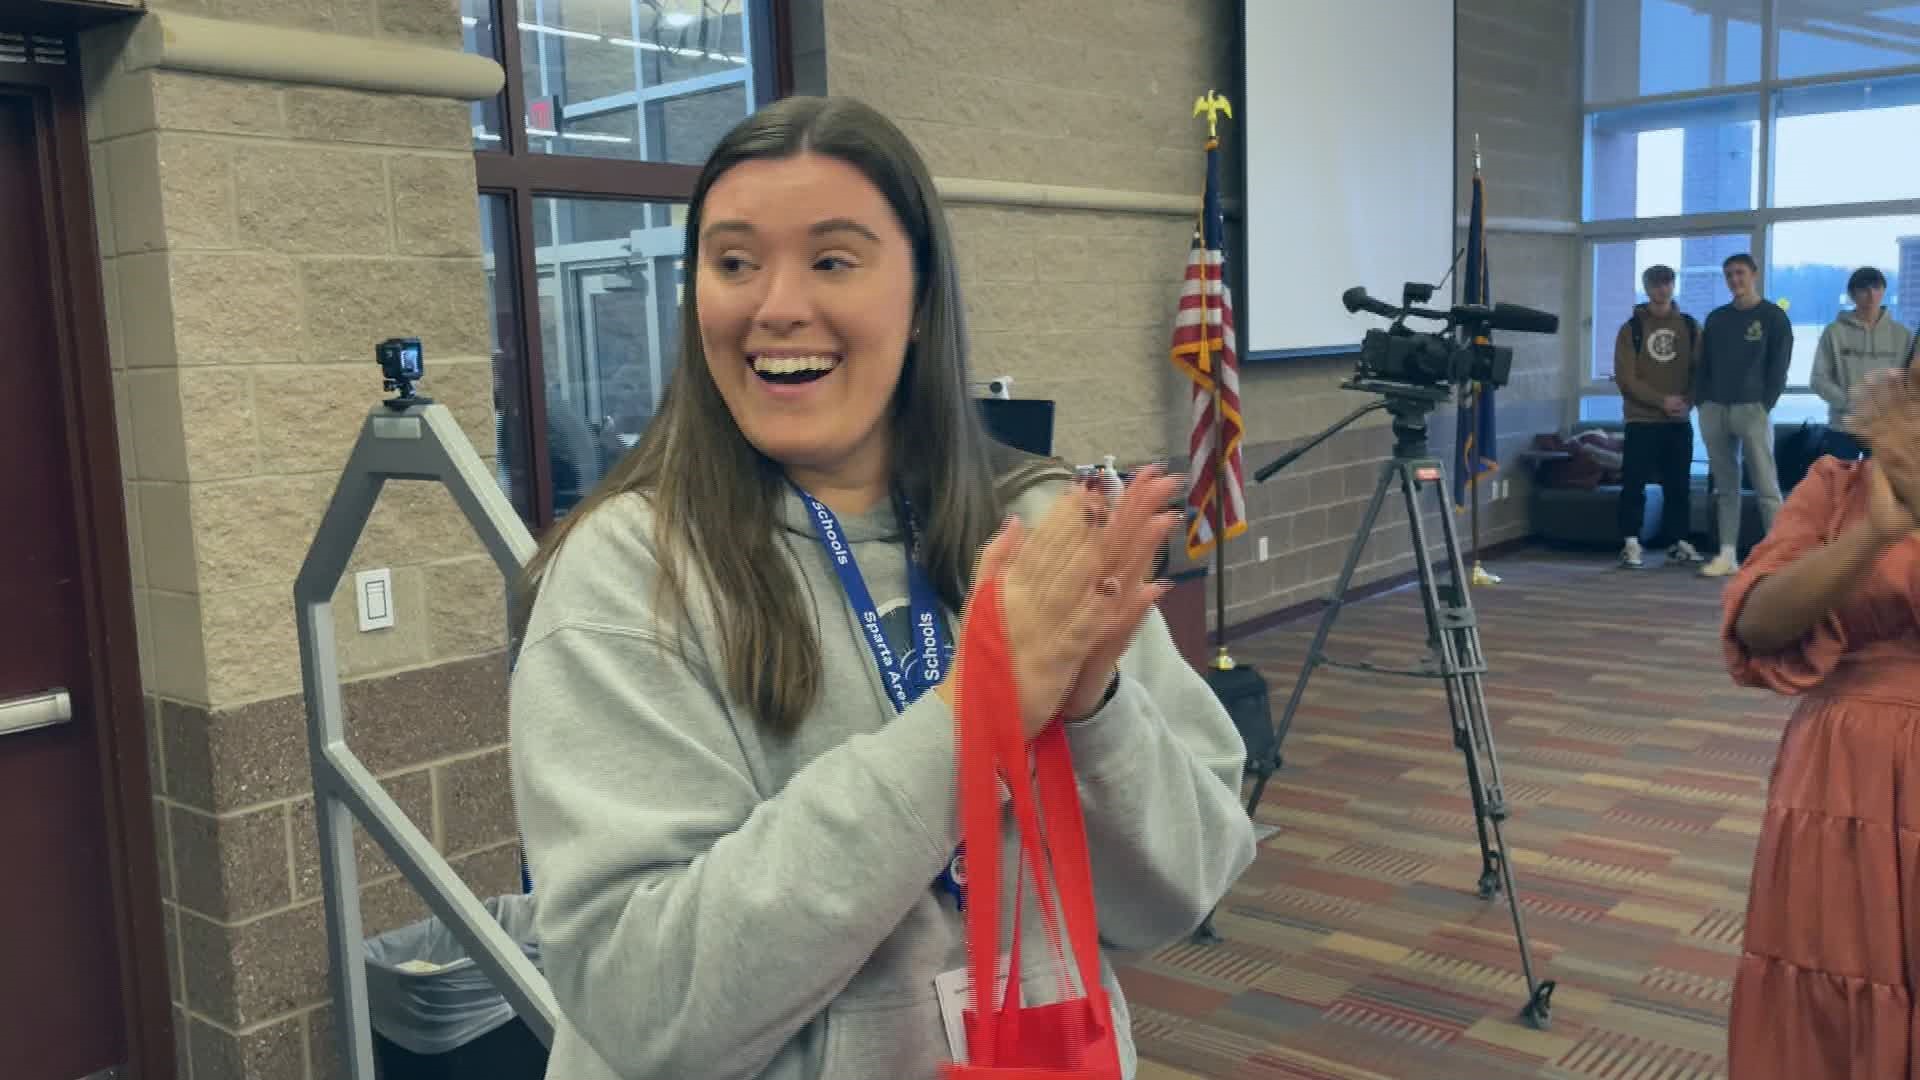 Dozens of high school students chipped in for our latest Teacher of the Week surprise at Sparta High School.